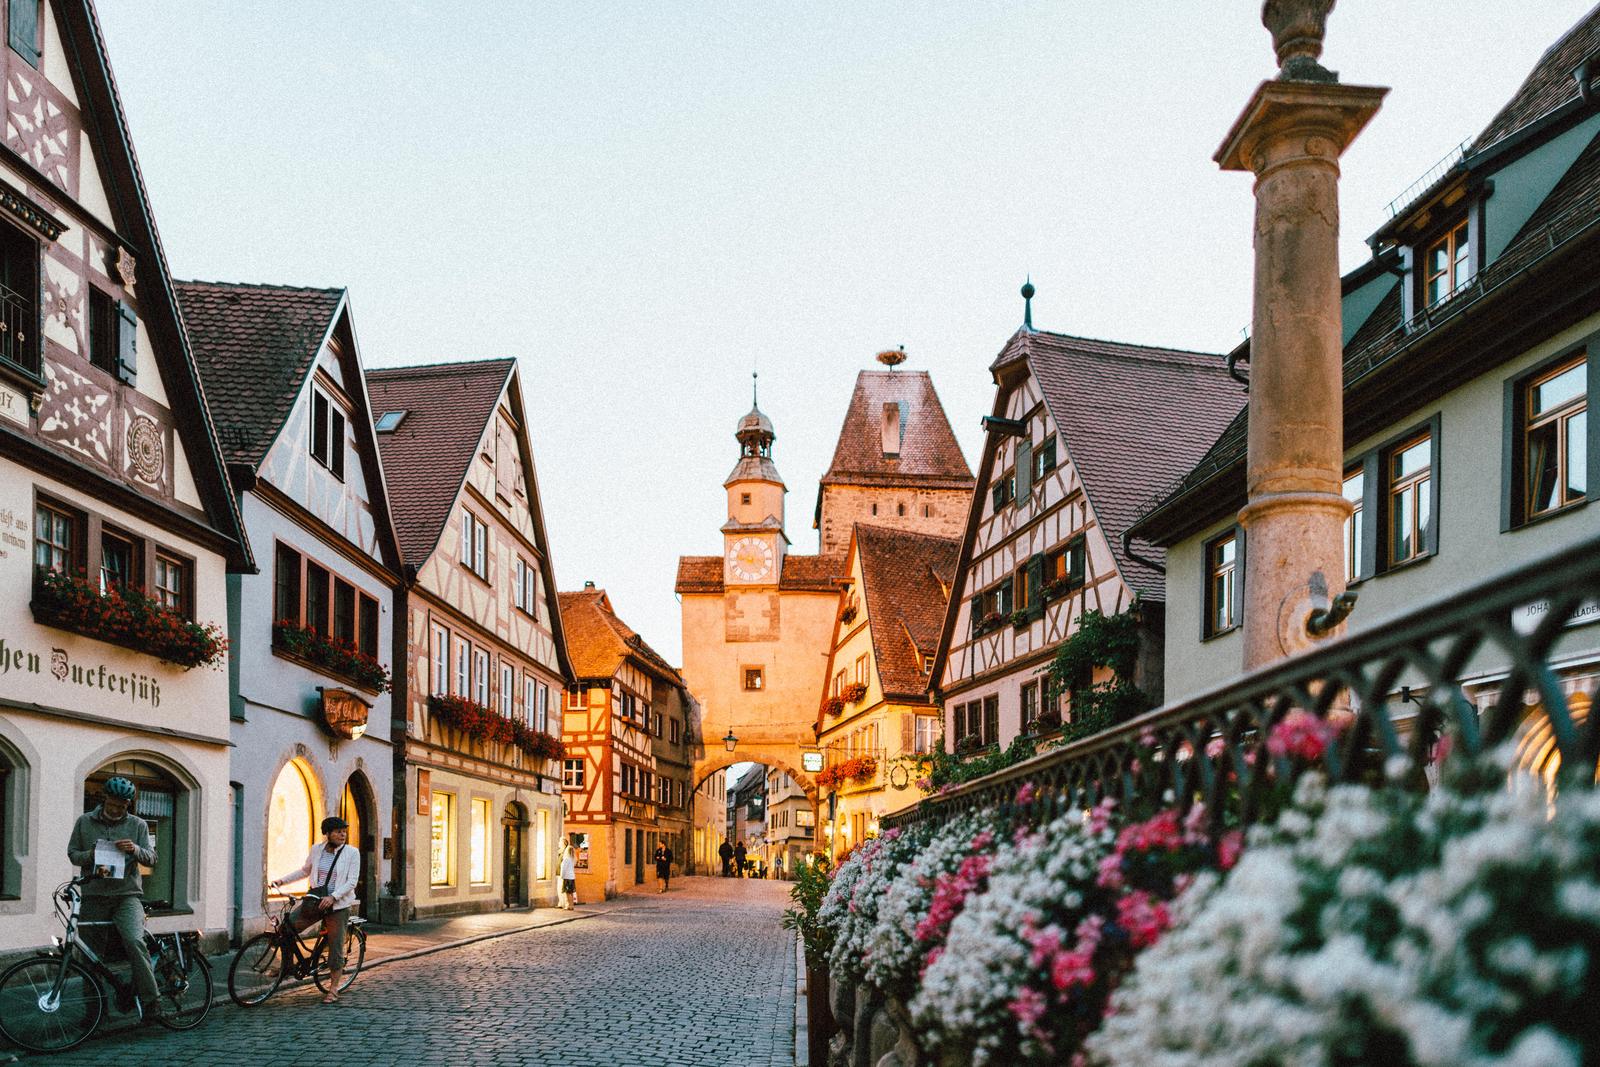 Can You *Actually* Score at Least 83% On This All-Rounded Knowledge Quiz? Germany